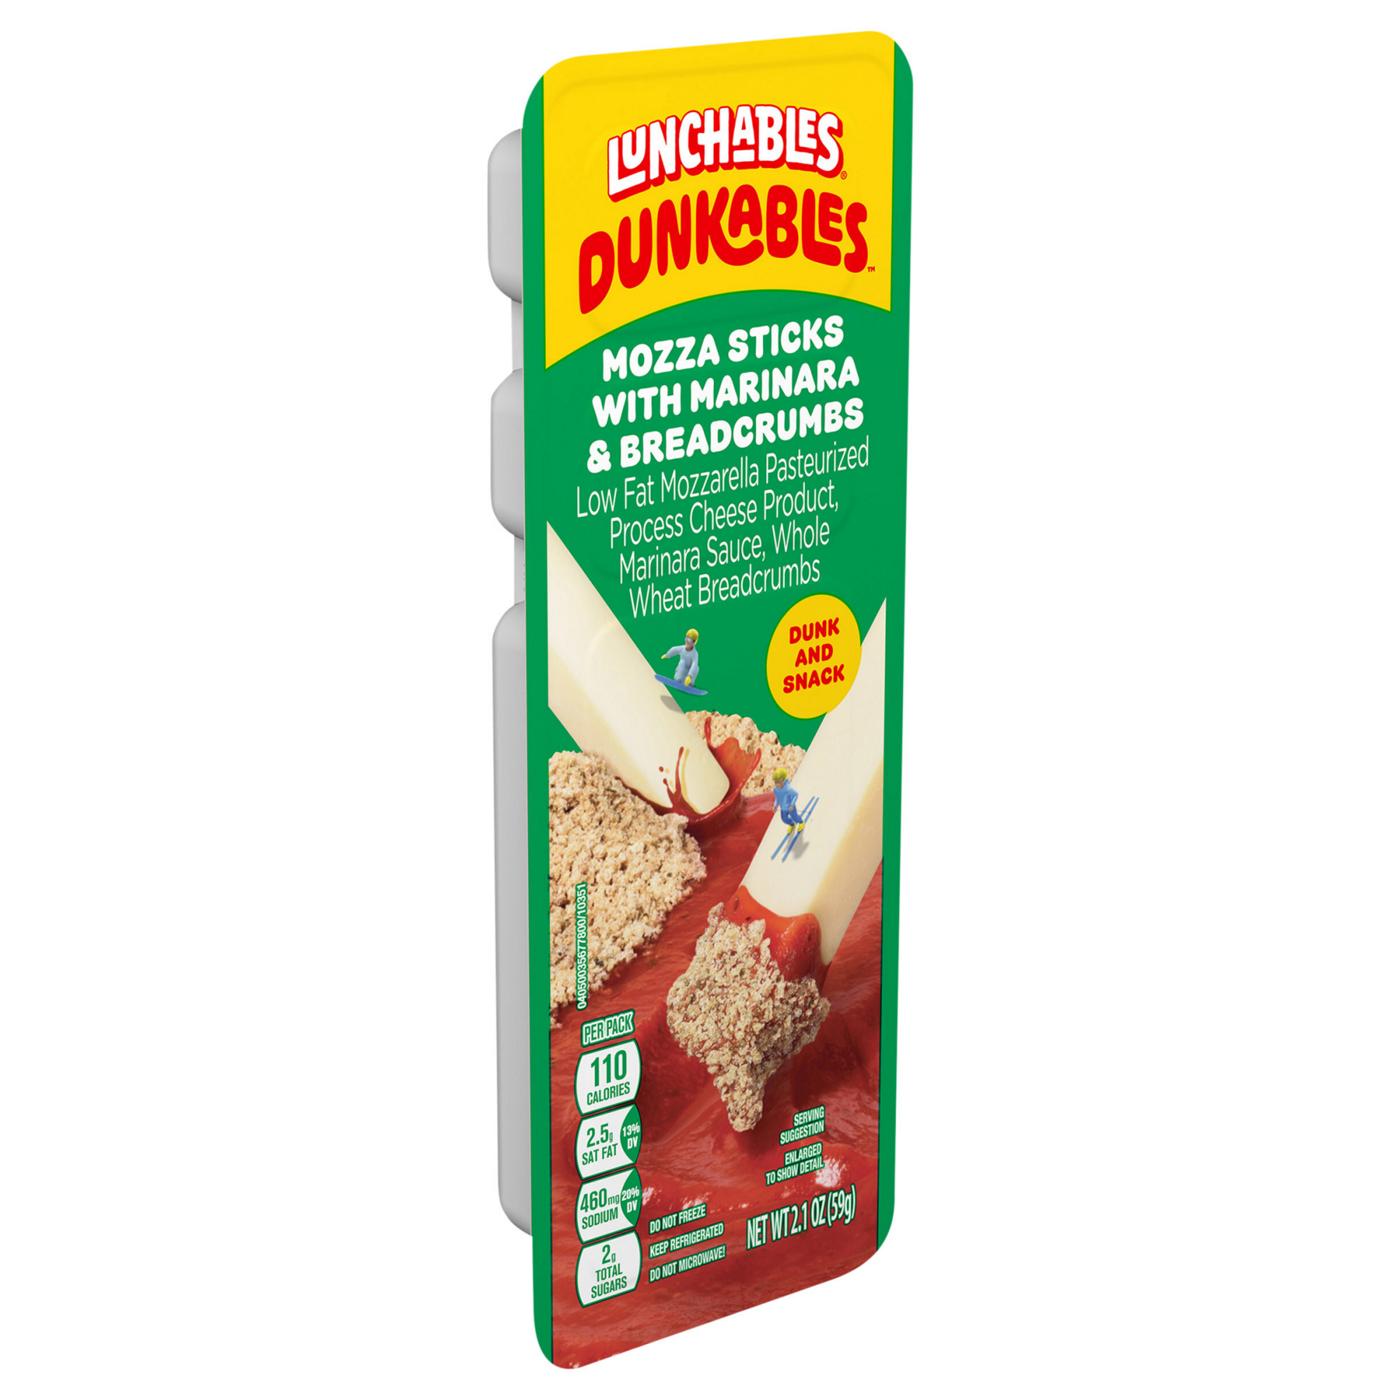 Lunchables Dunkables Snack Kit Tray - Mozza Sticks with Marinara & Breadcrumbs; image 3 of 8